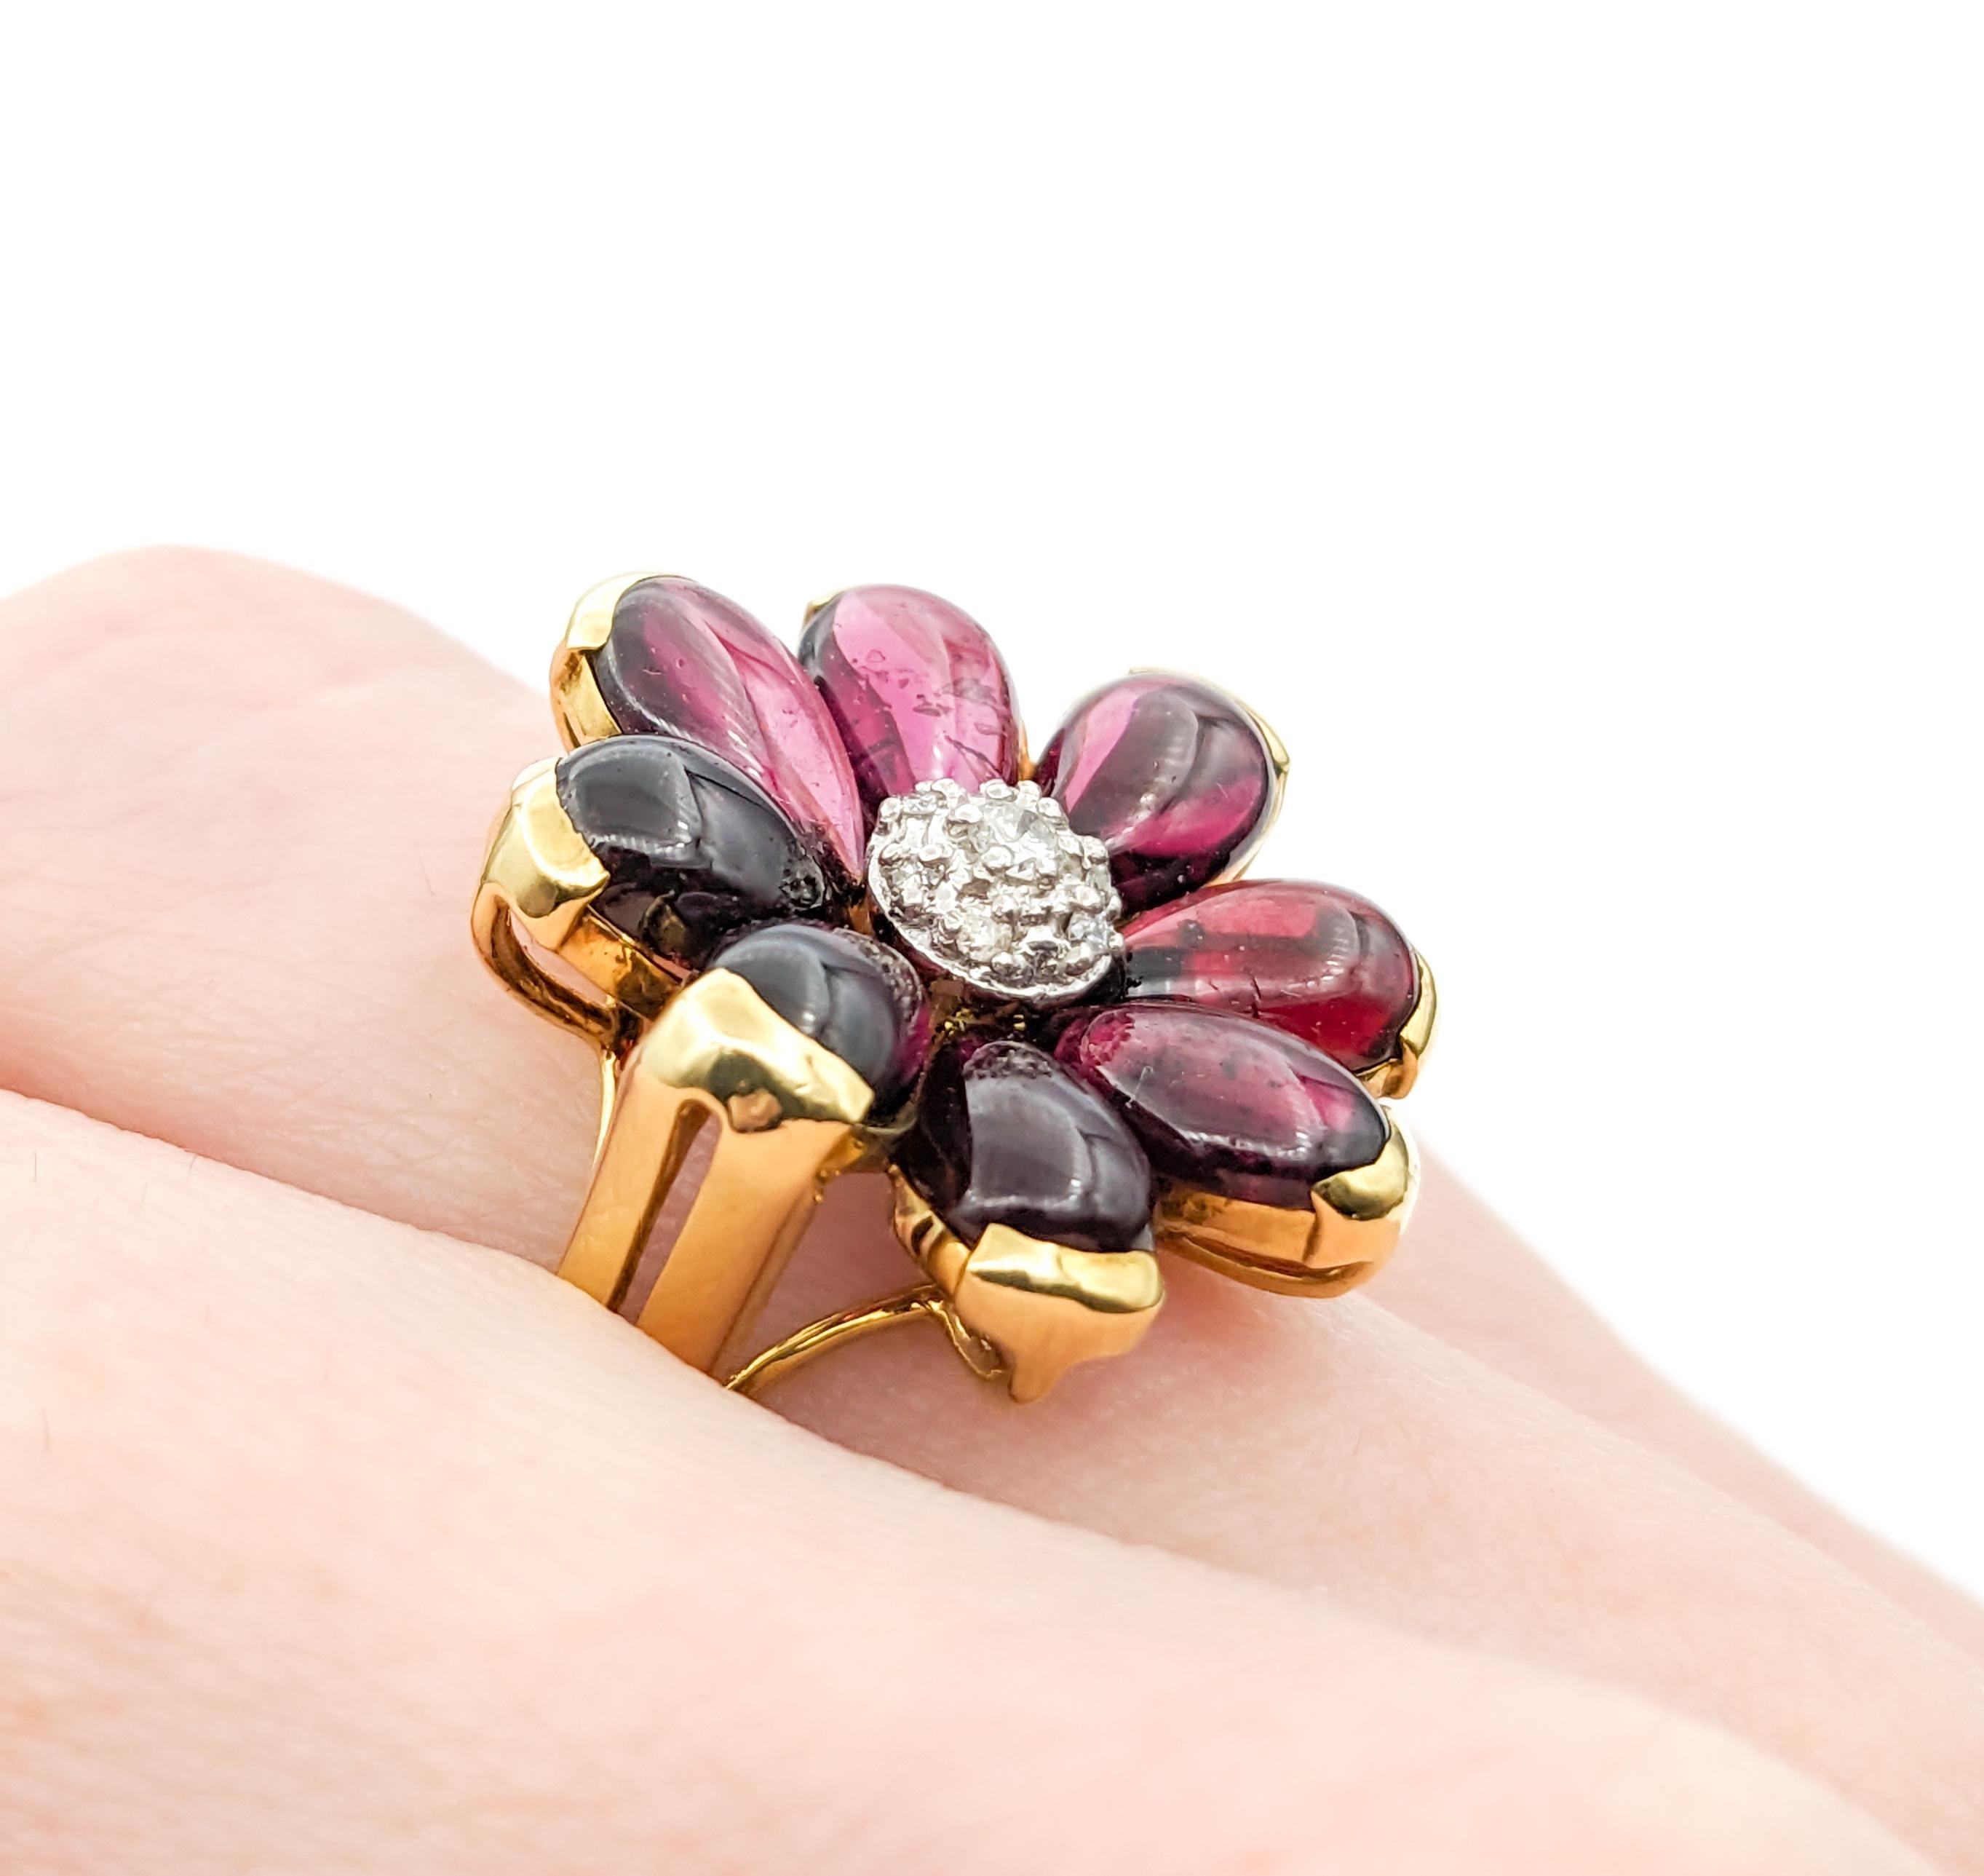 6ctw Pink Tourmaline Cabochon & Diamond Flower Ring In Yellow Gold For Sale 1